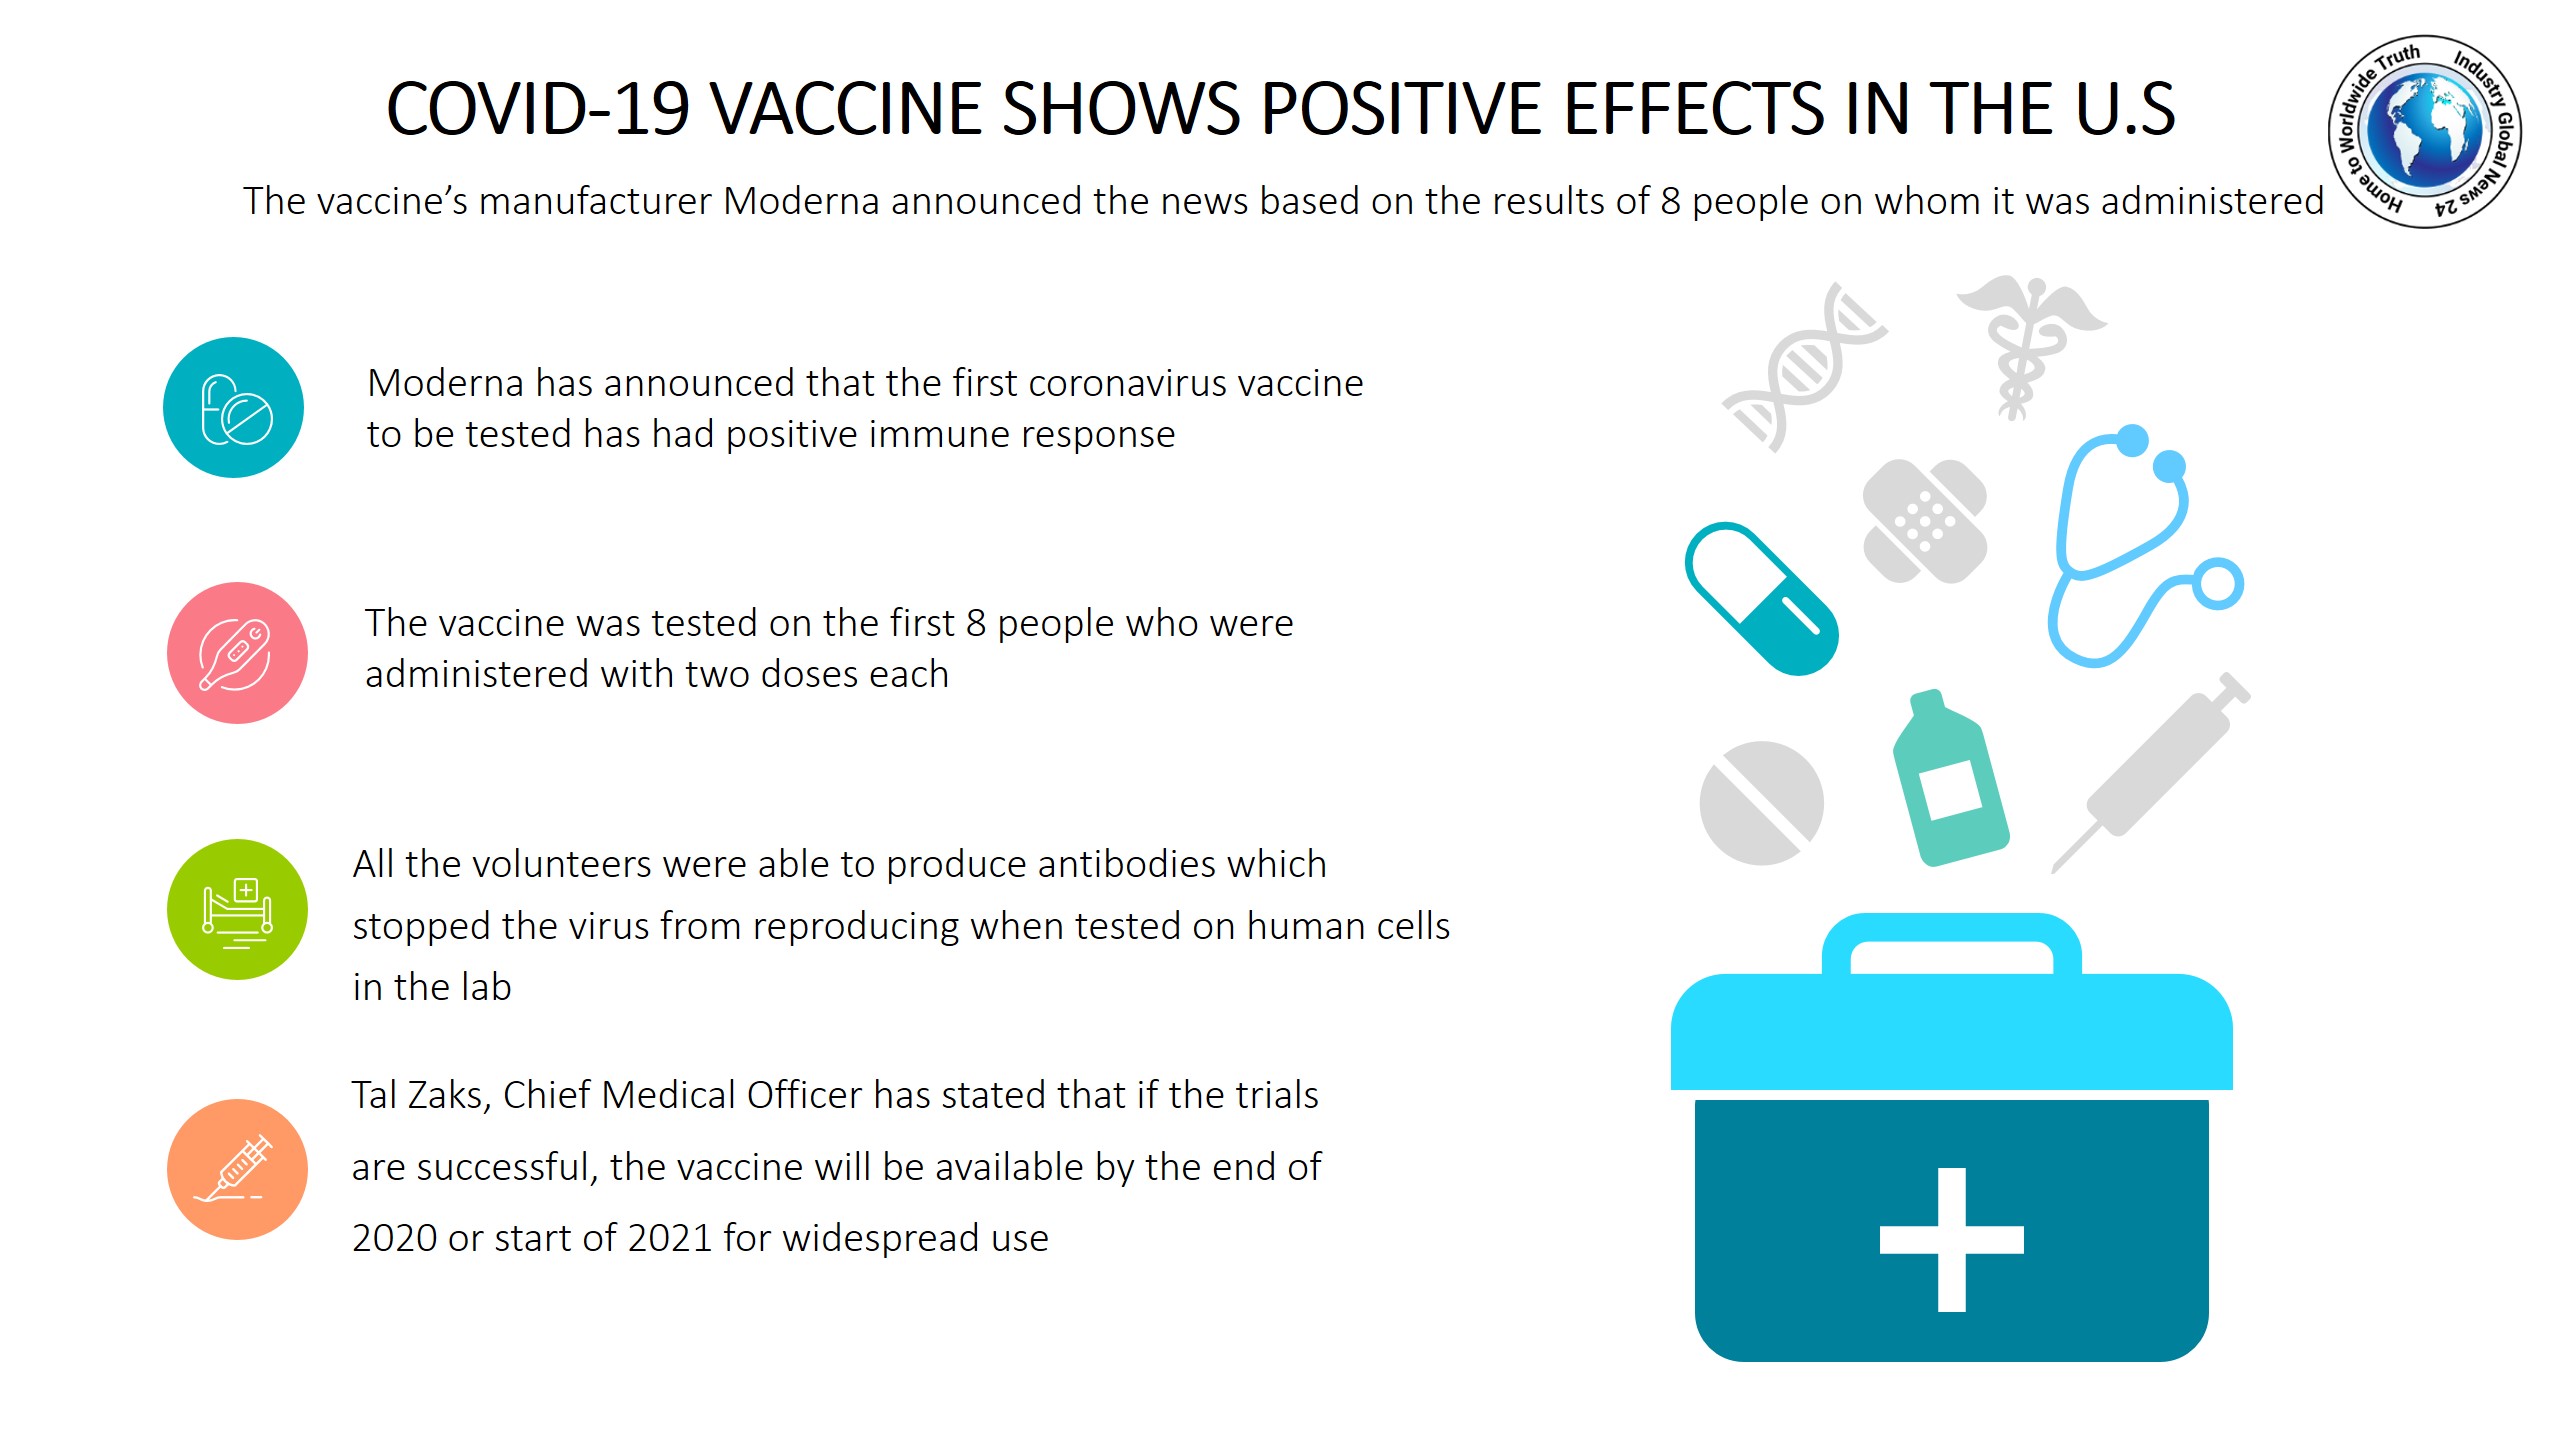 COVID-19 vaccine shows positive effects